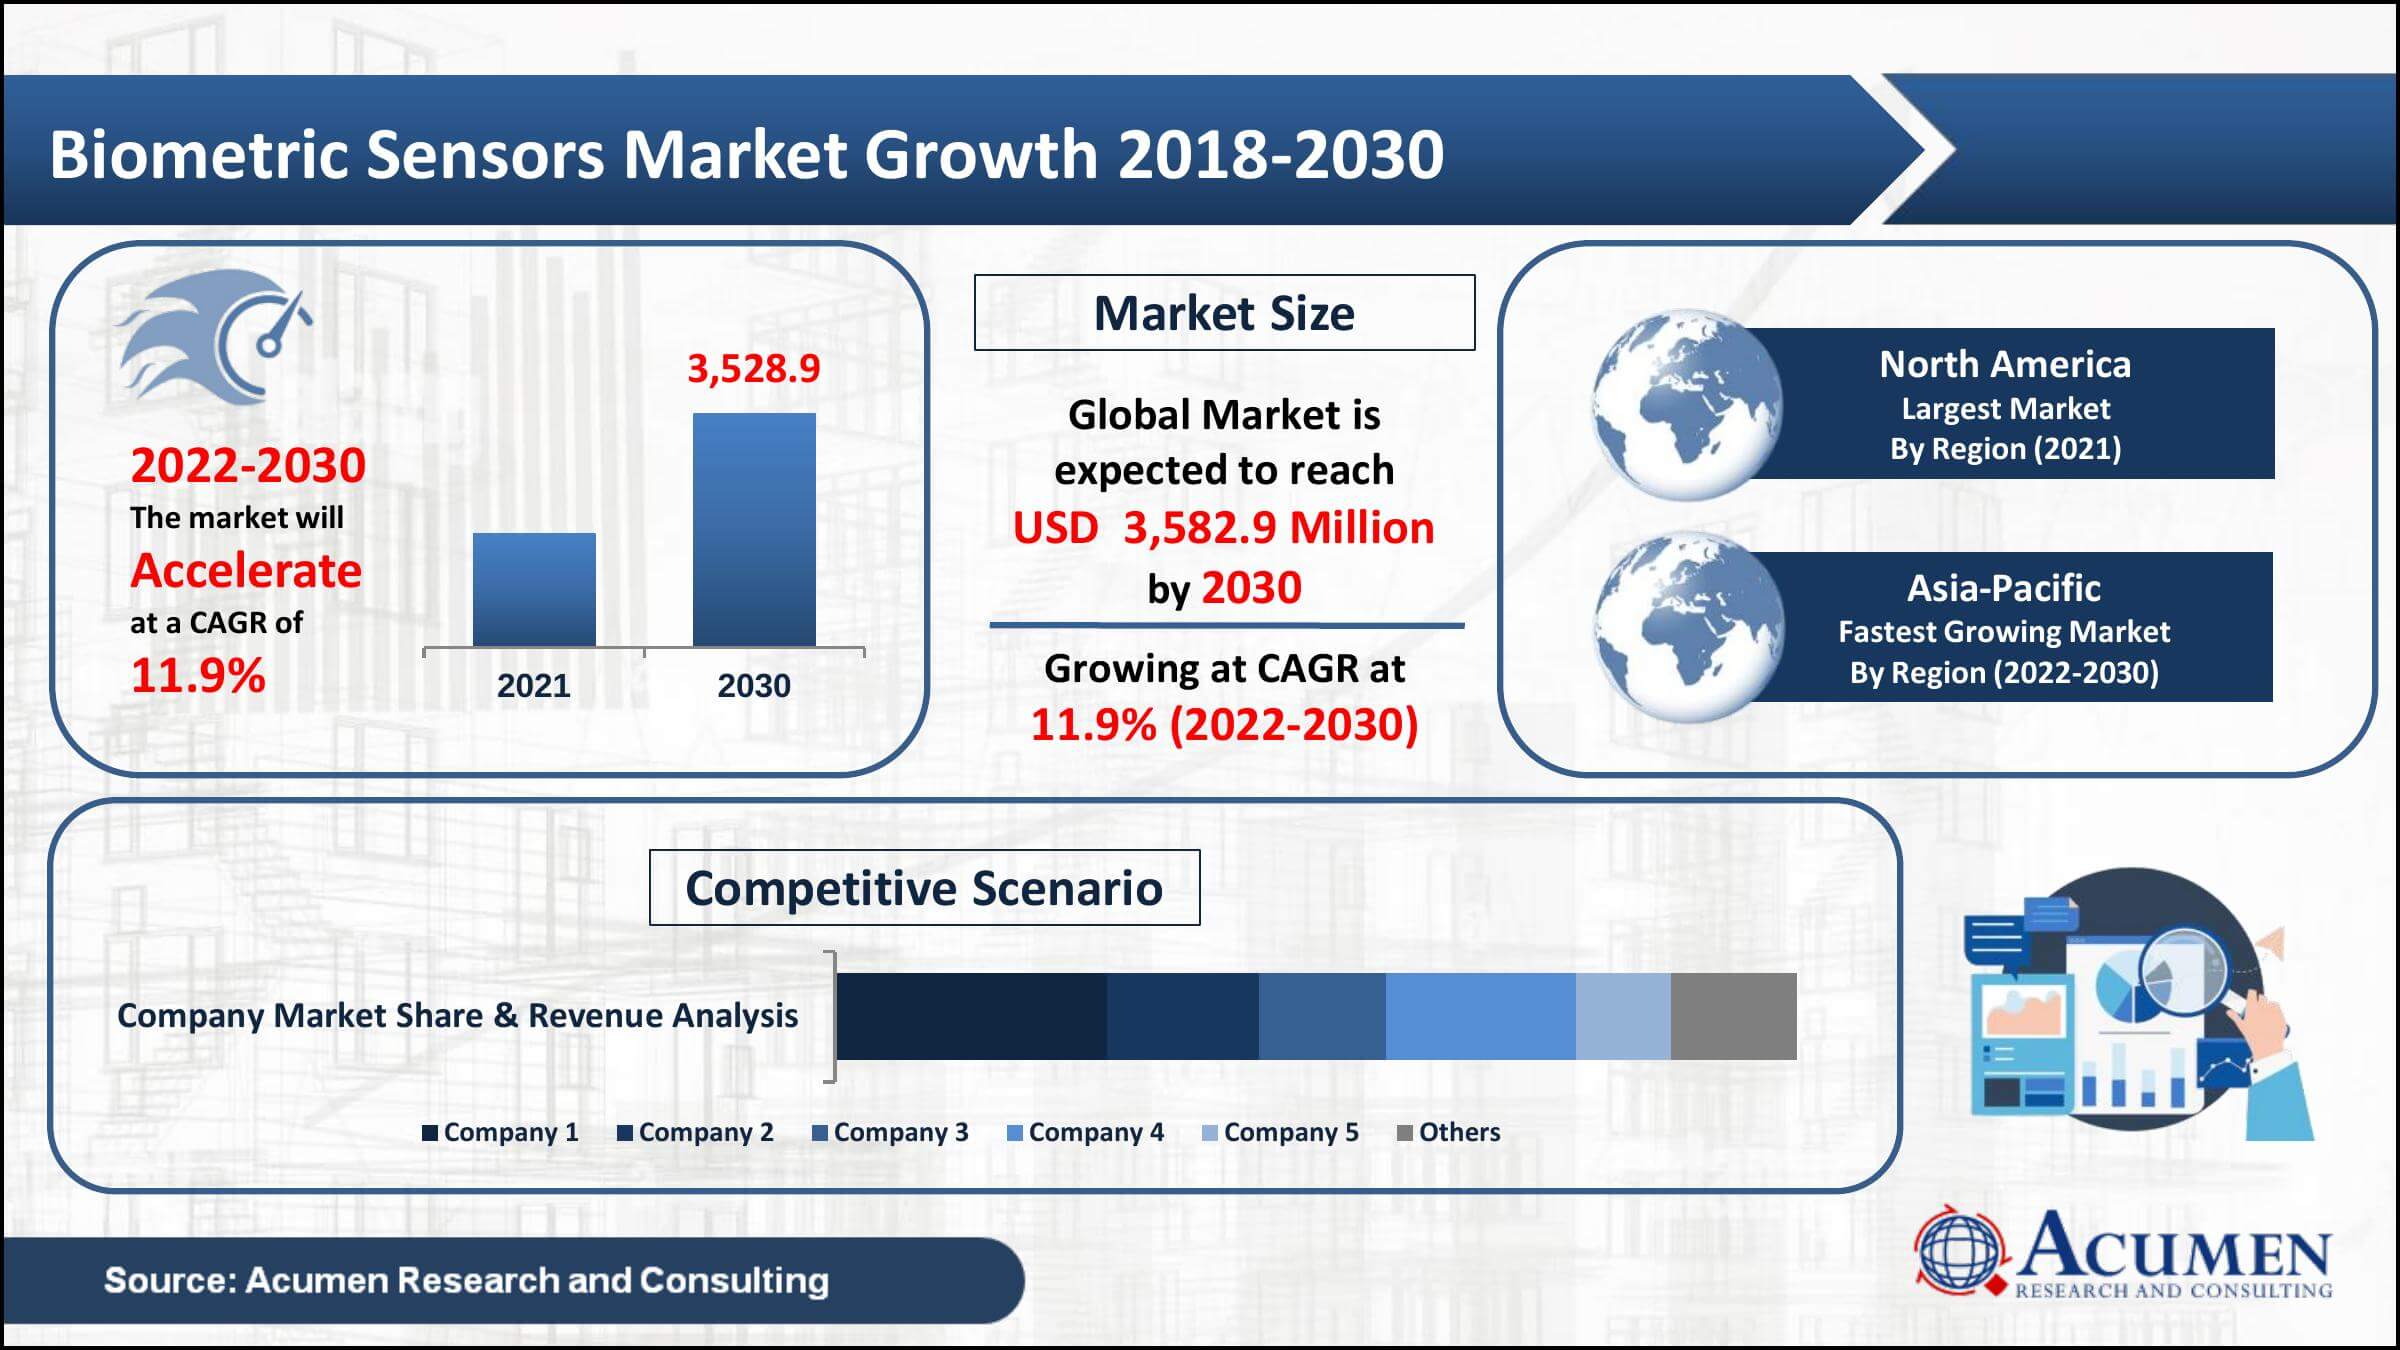 Global biometric sensors market revenue collected USD 1,319.5 Million in 2021, with an 11.9% CAGR between 2022 and 2030